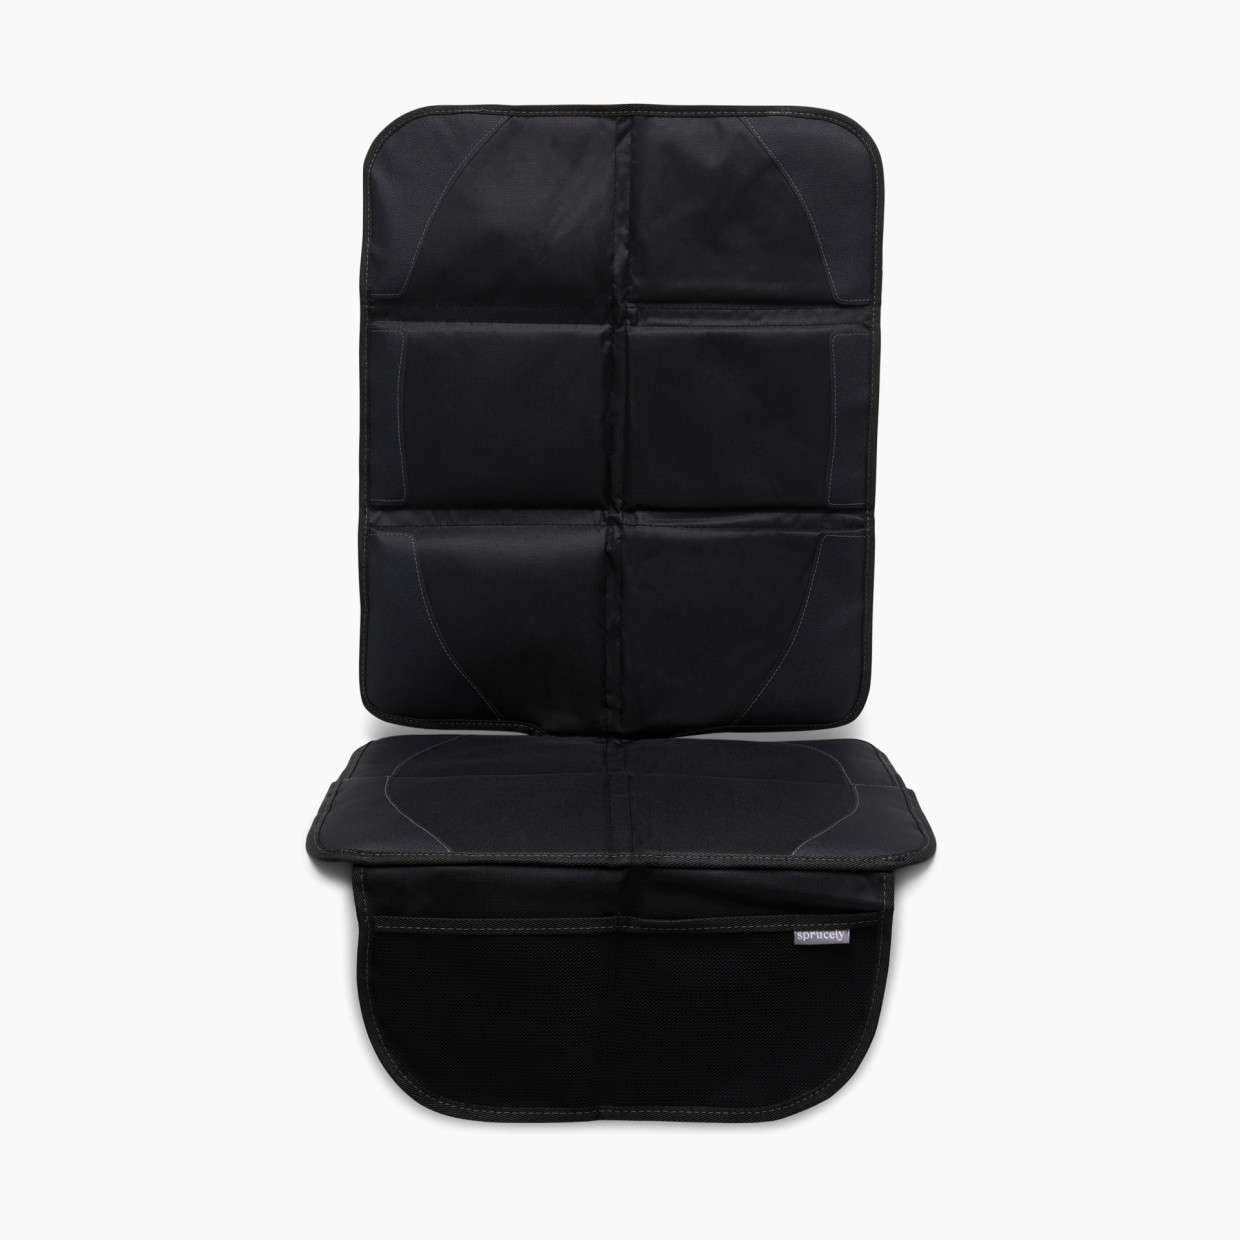 Sprucely Car Seat Protector - Black.